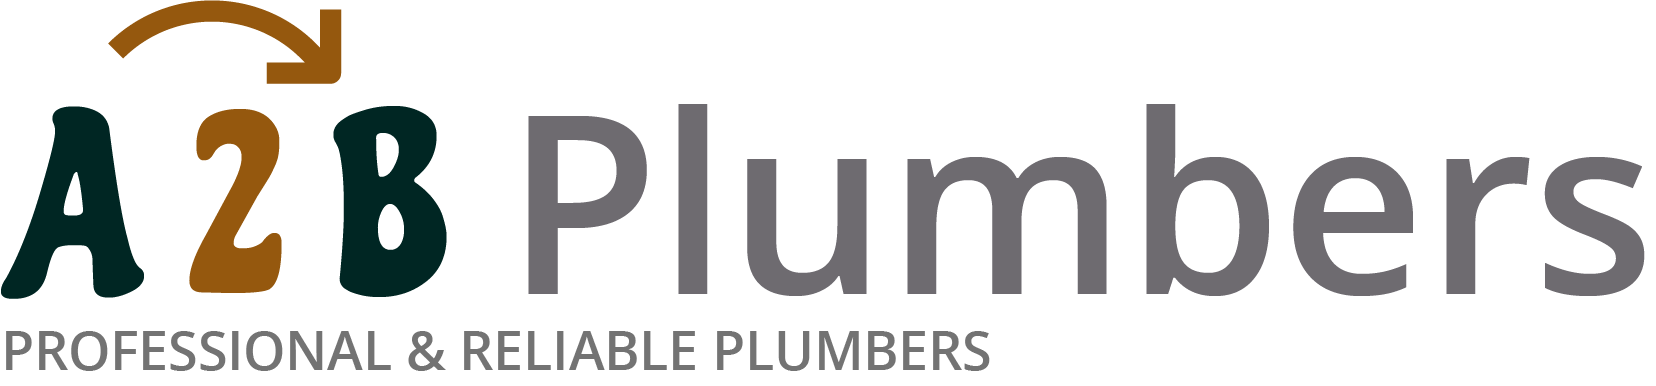 If you need a boiler installed, a radiator repaired or a leaking tap fixed, call us now - we provide services for properties in Tynemouth and the local area.